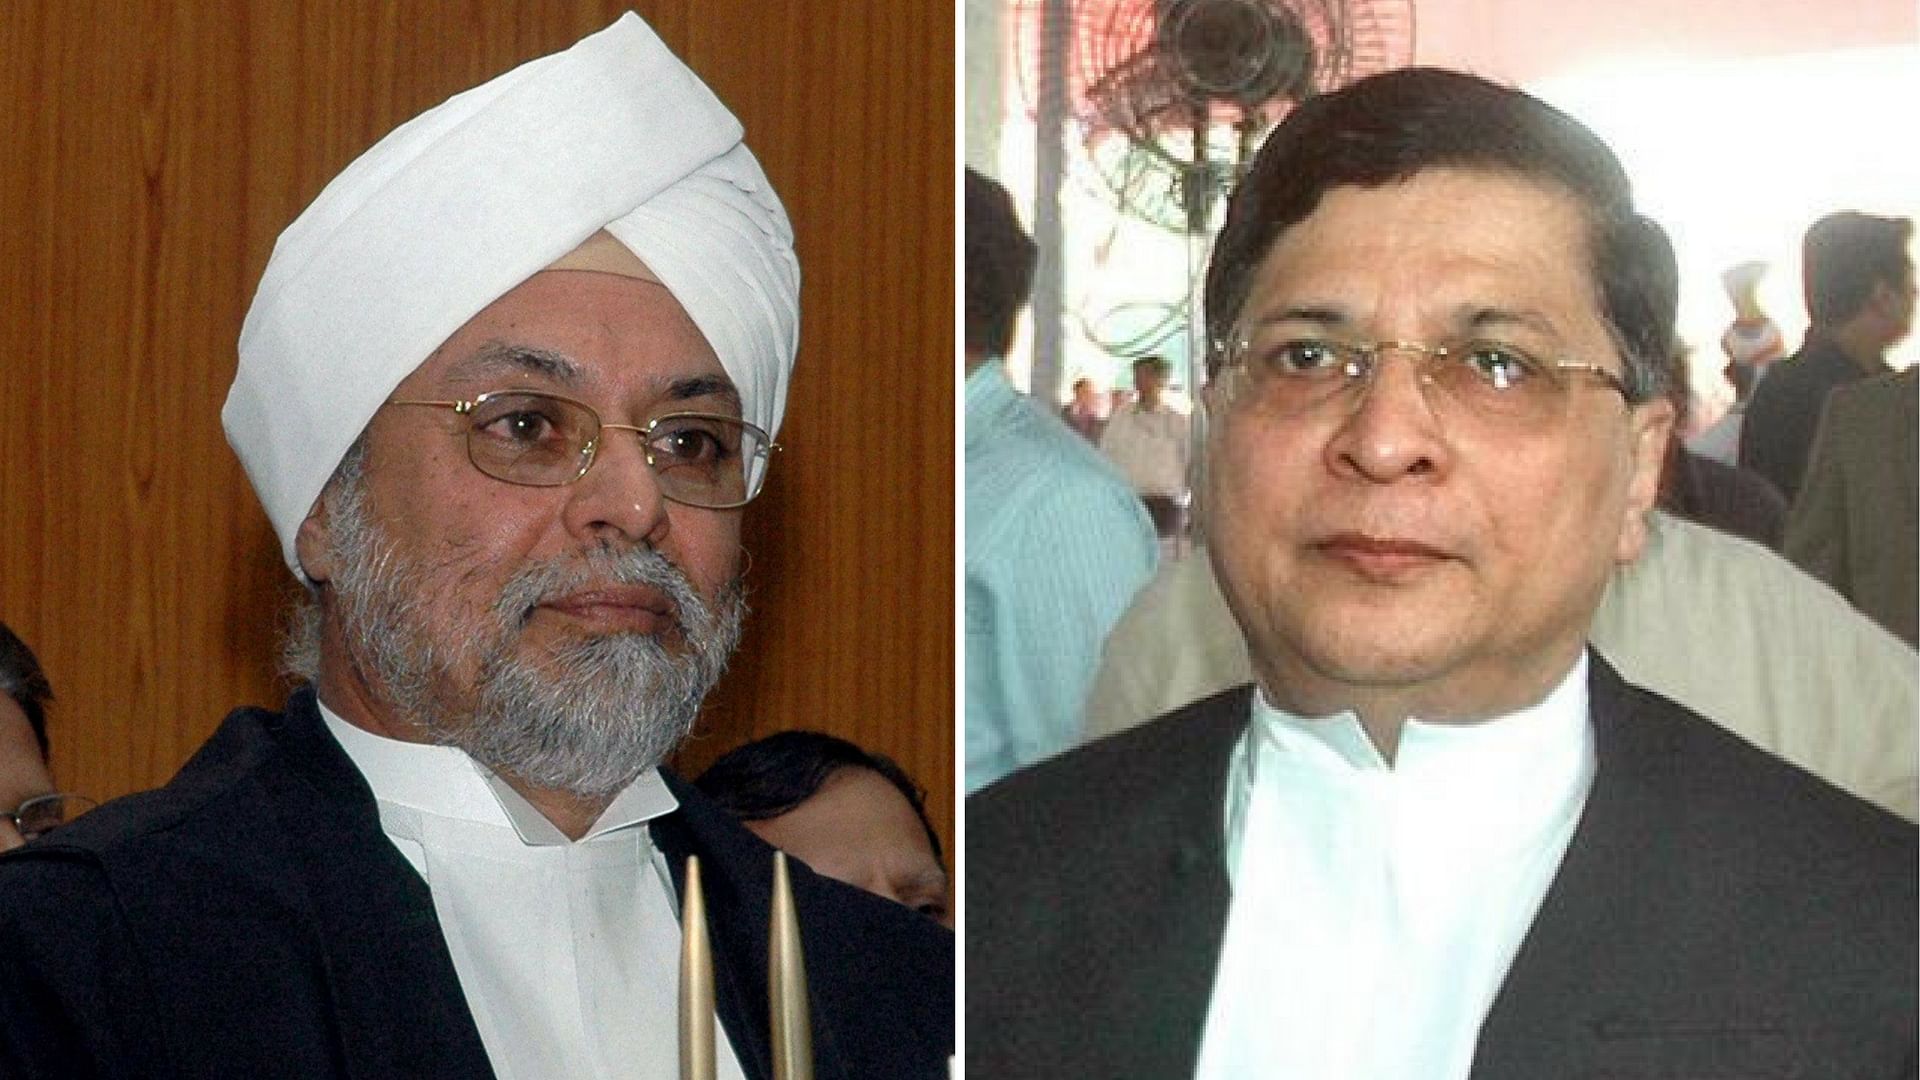 Now his watch ends: Justice Khehar hands the baton to Justice Misra